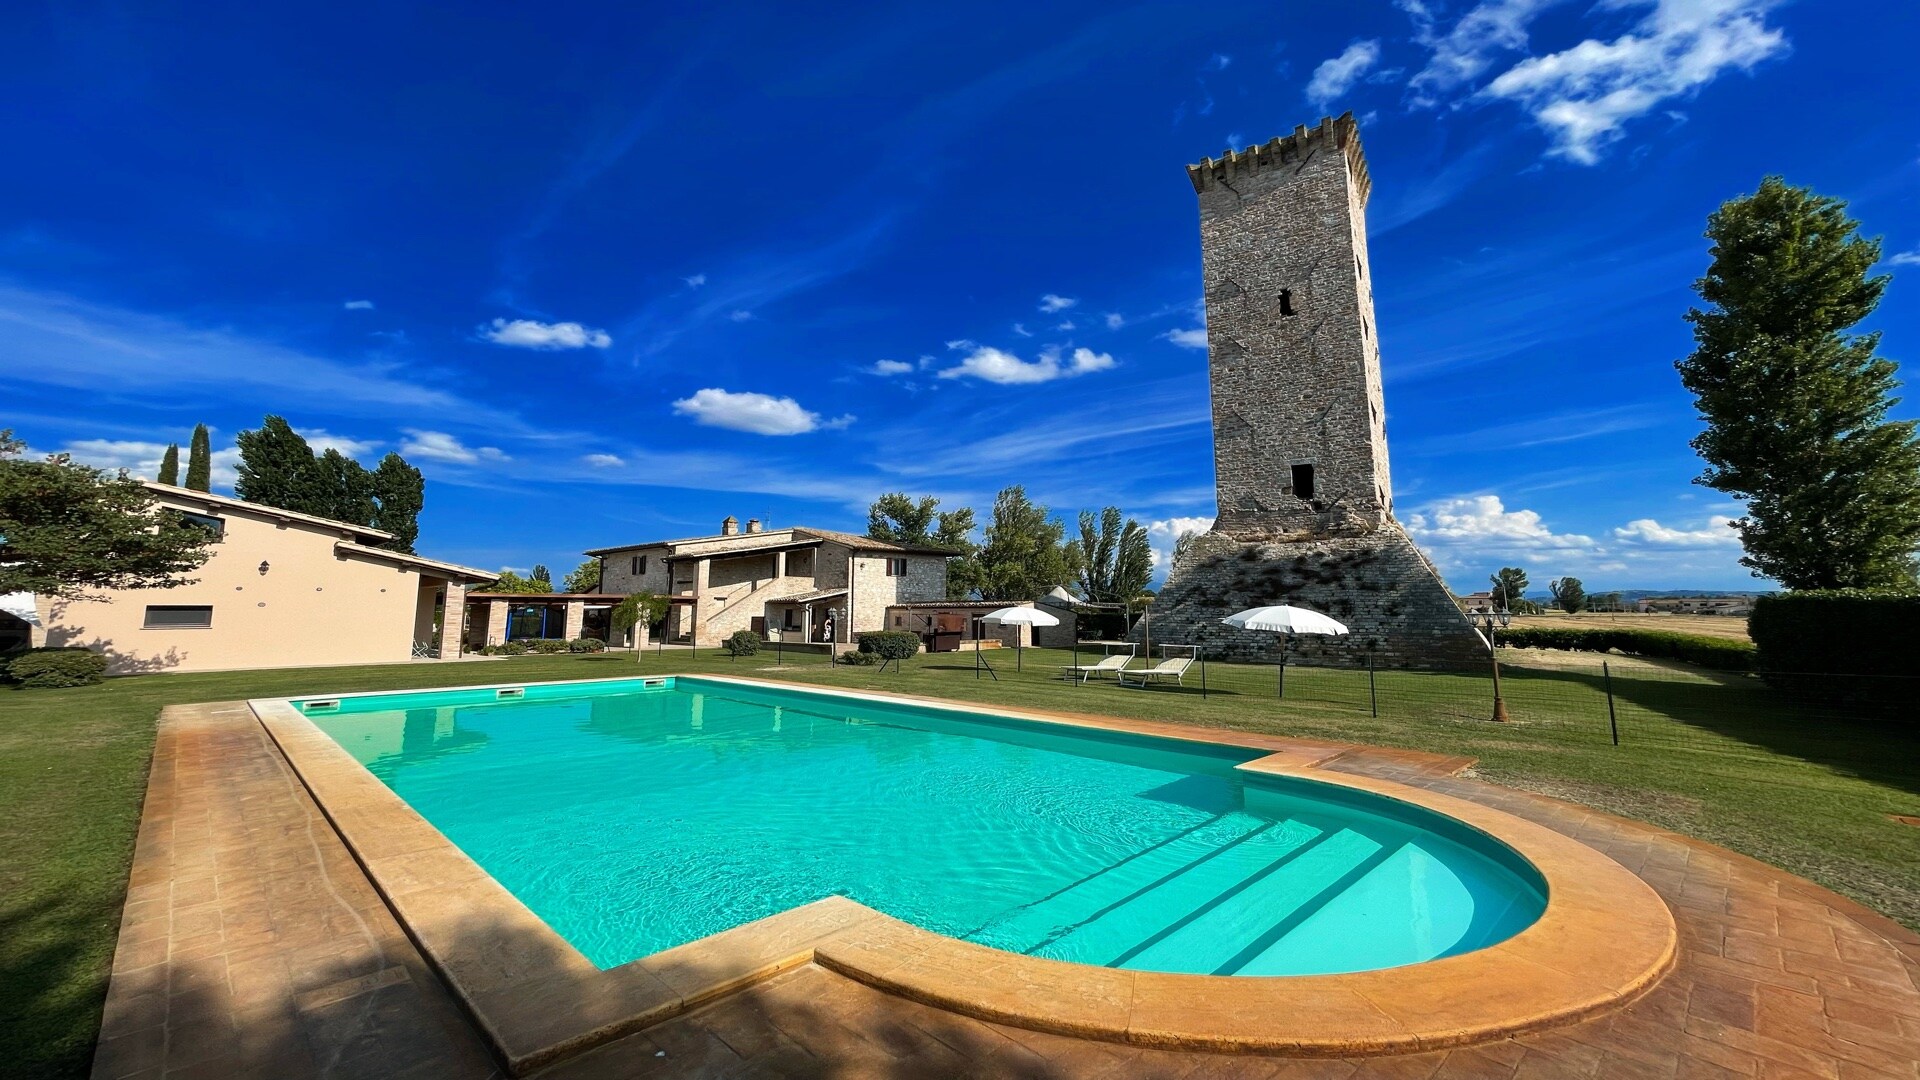 Property Image 2 - Spello By The Pool - Sleeps 11, Italy - Large private pool - Aircon - Wifi